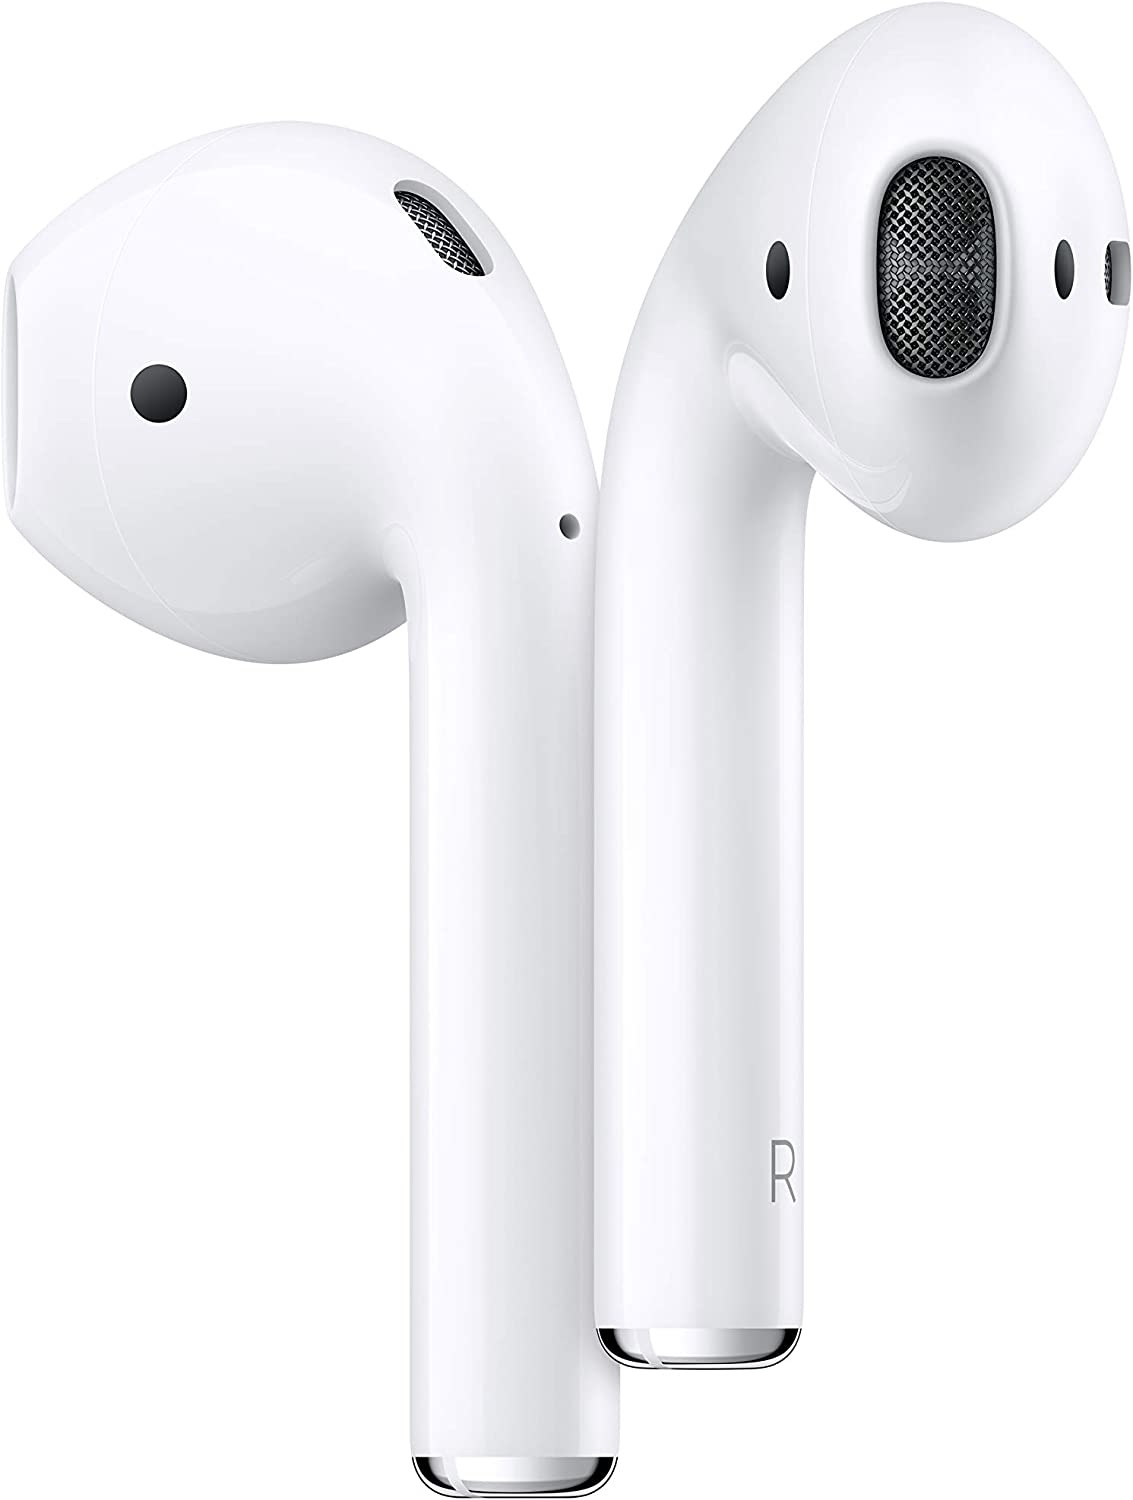 Get the most popular AirPods for much less than the official Apple store